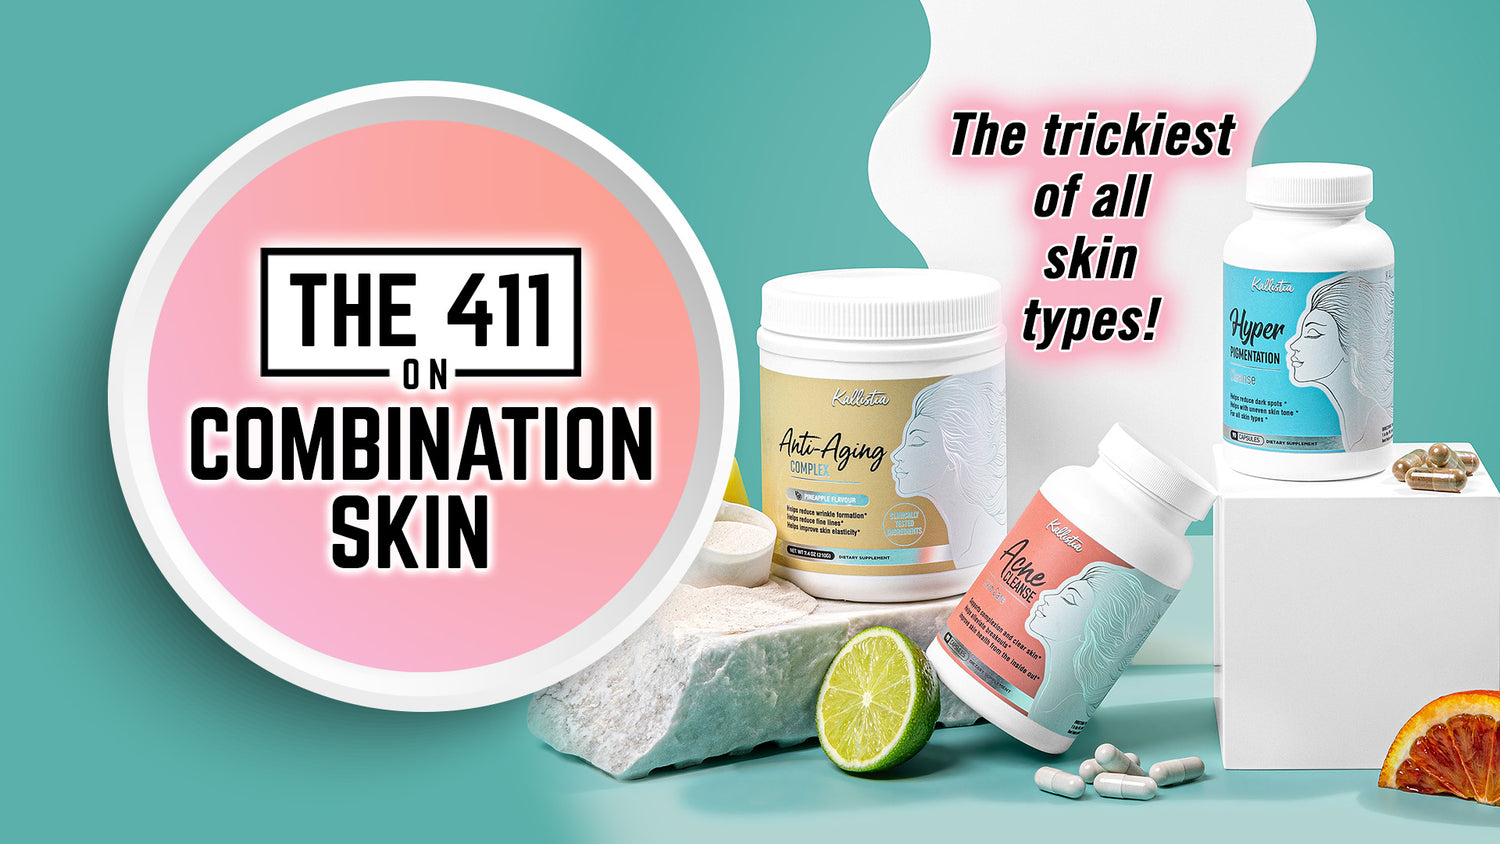 The 411 on Combination Skin